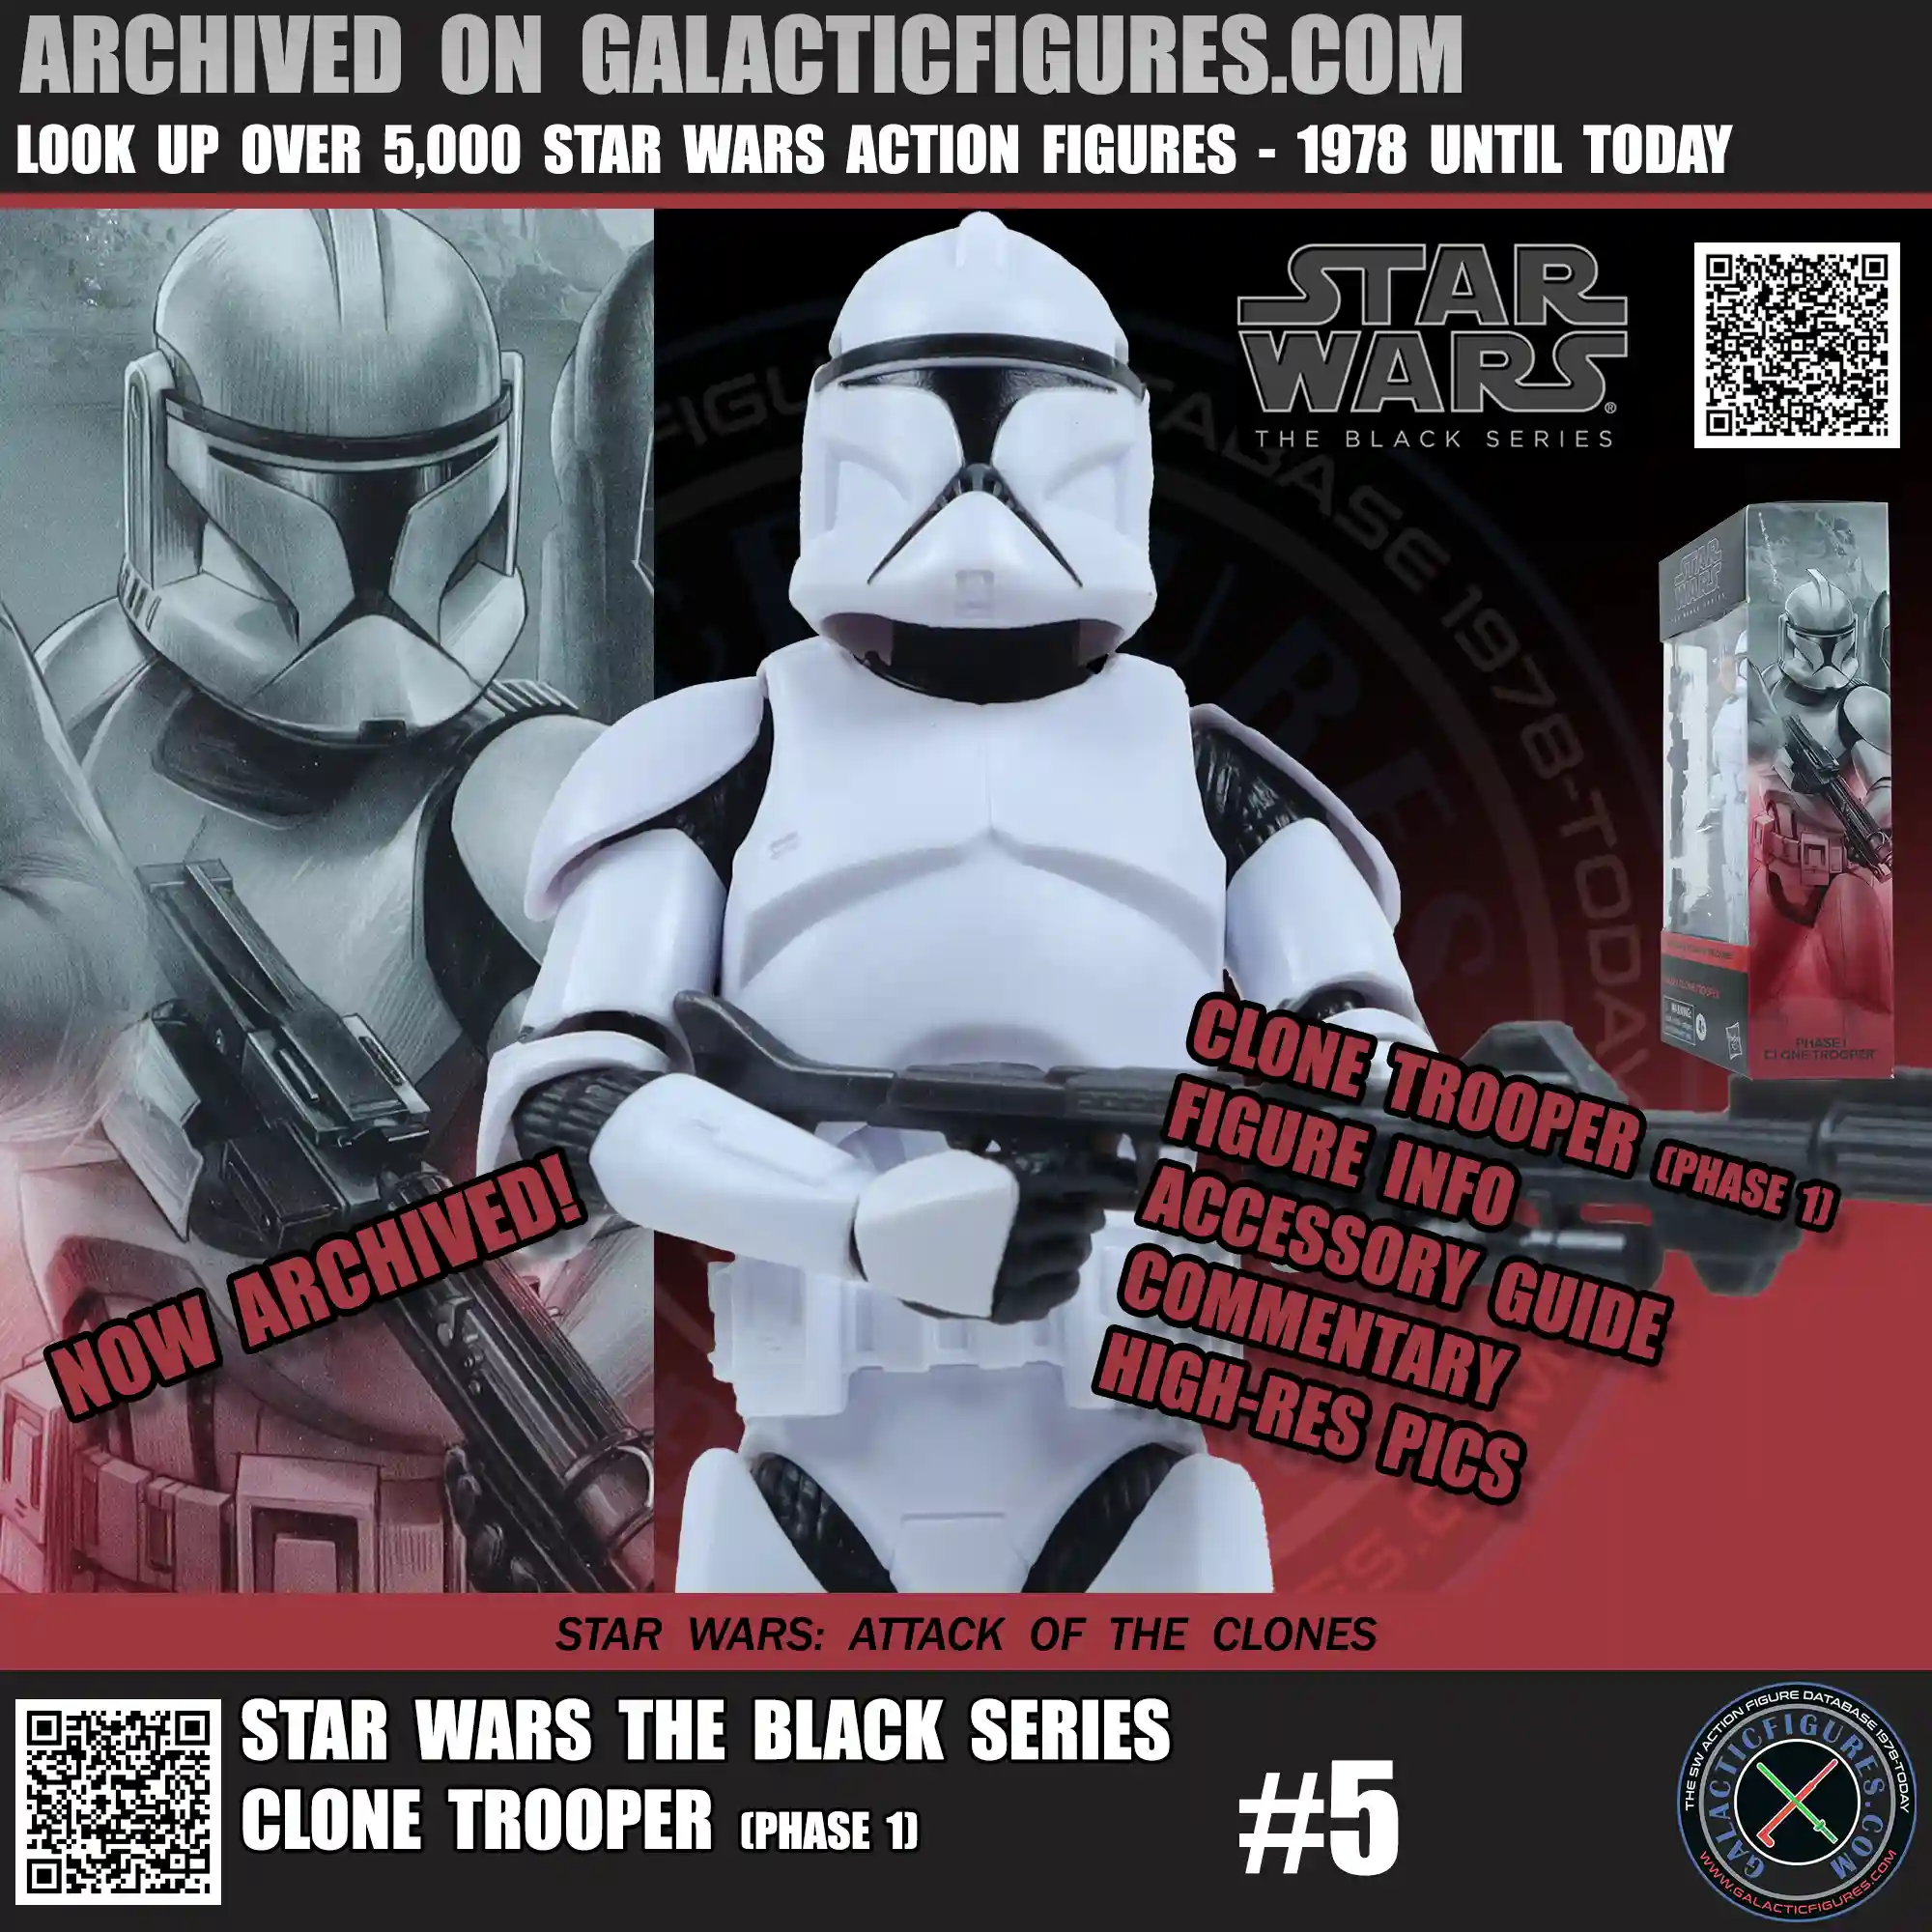 Clone Trooper Phase 1 Archived